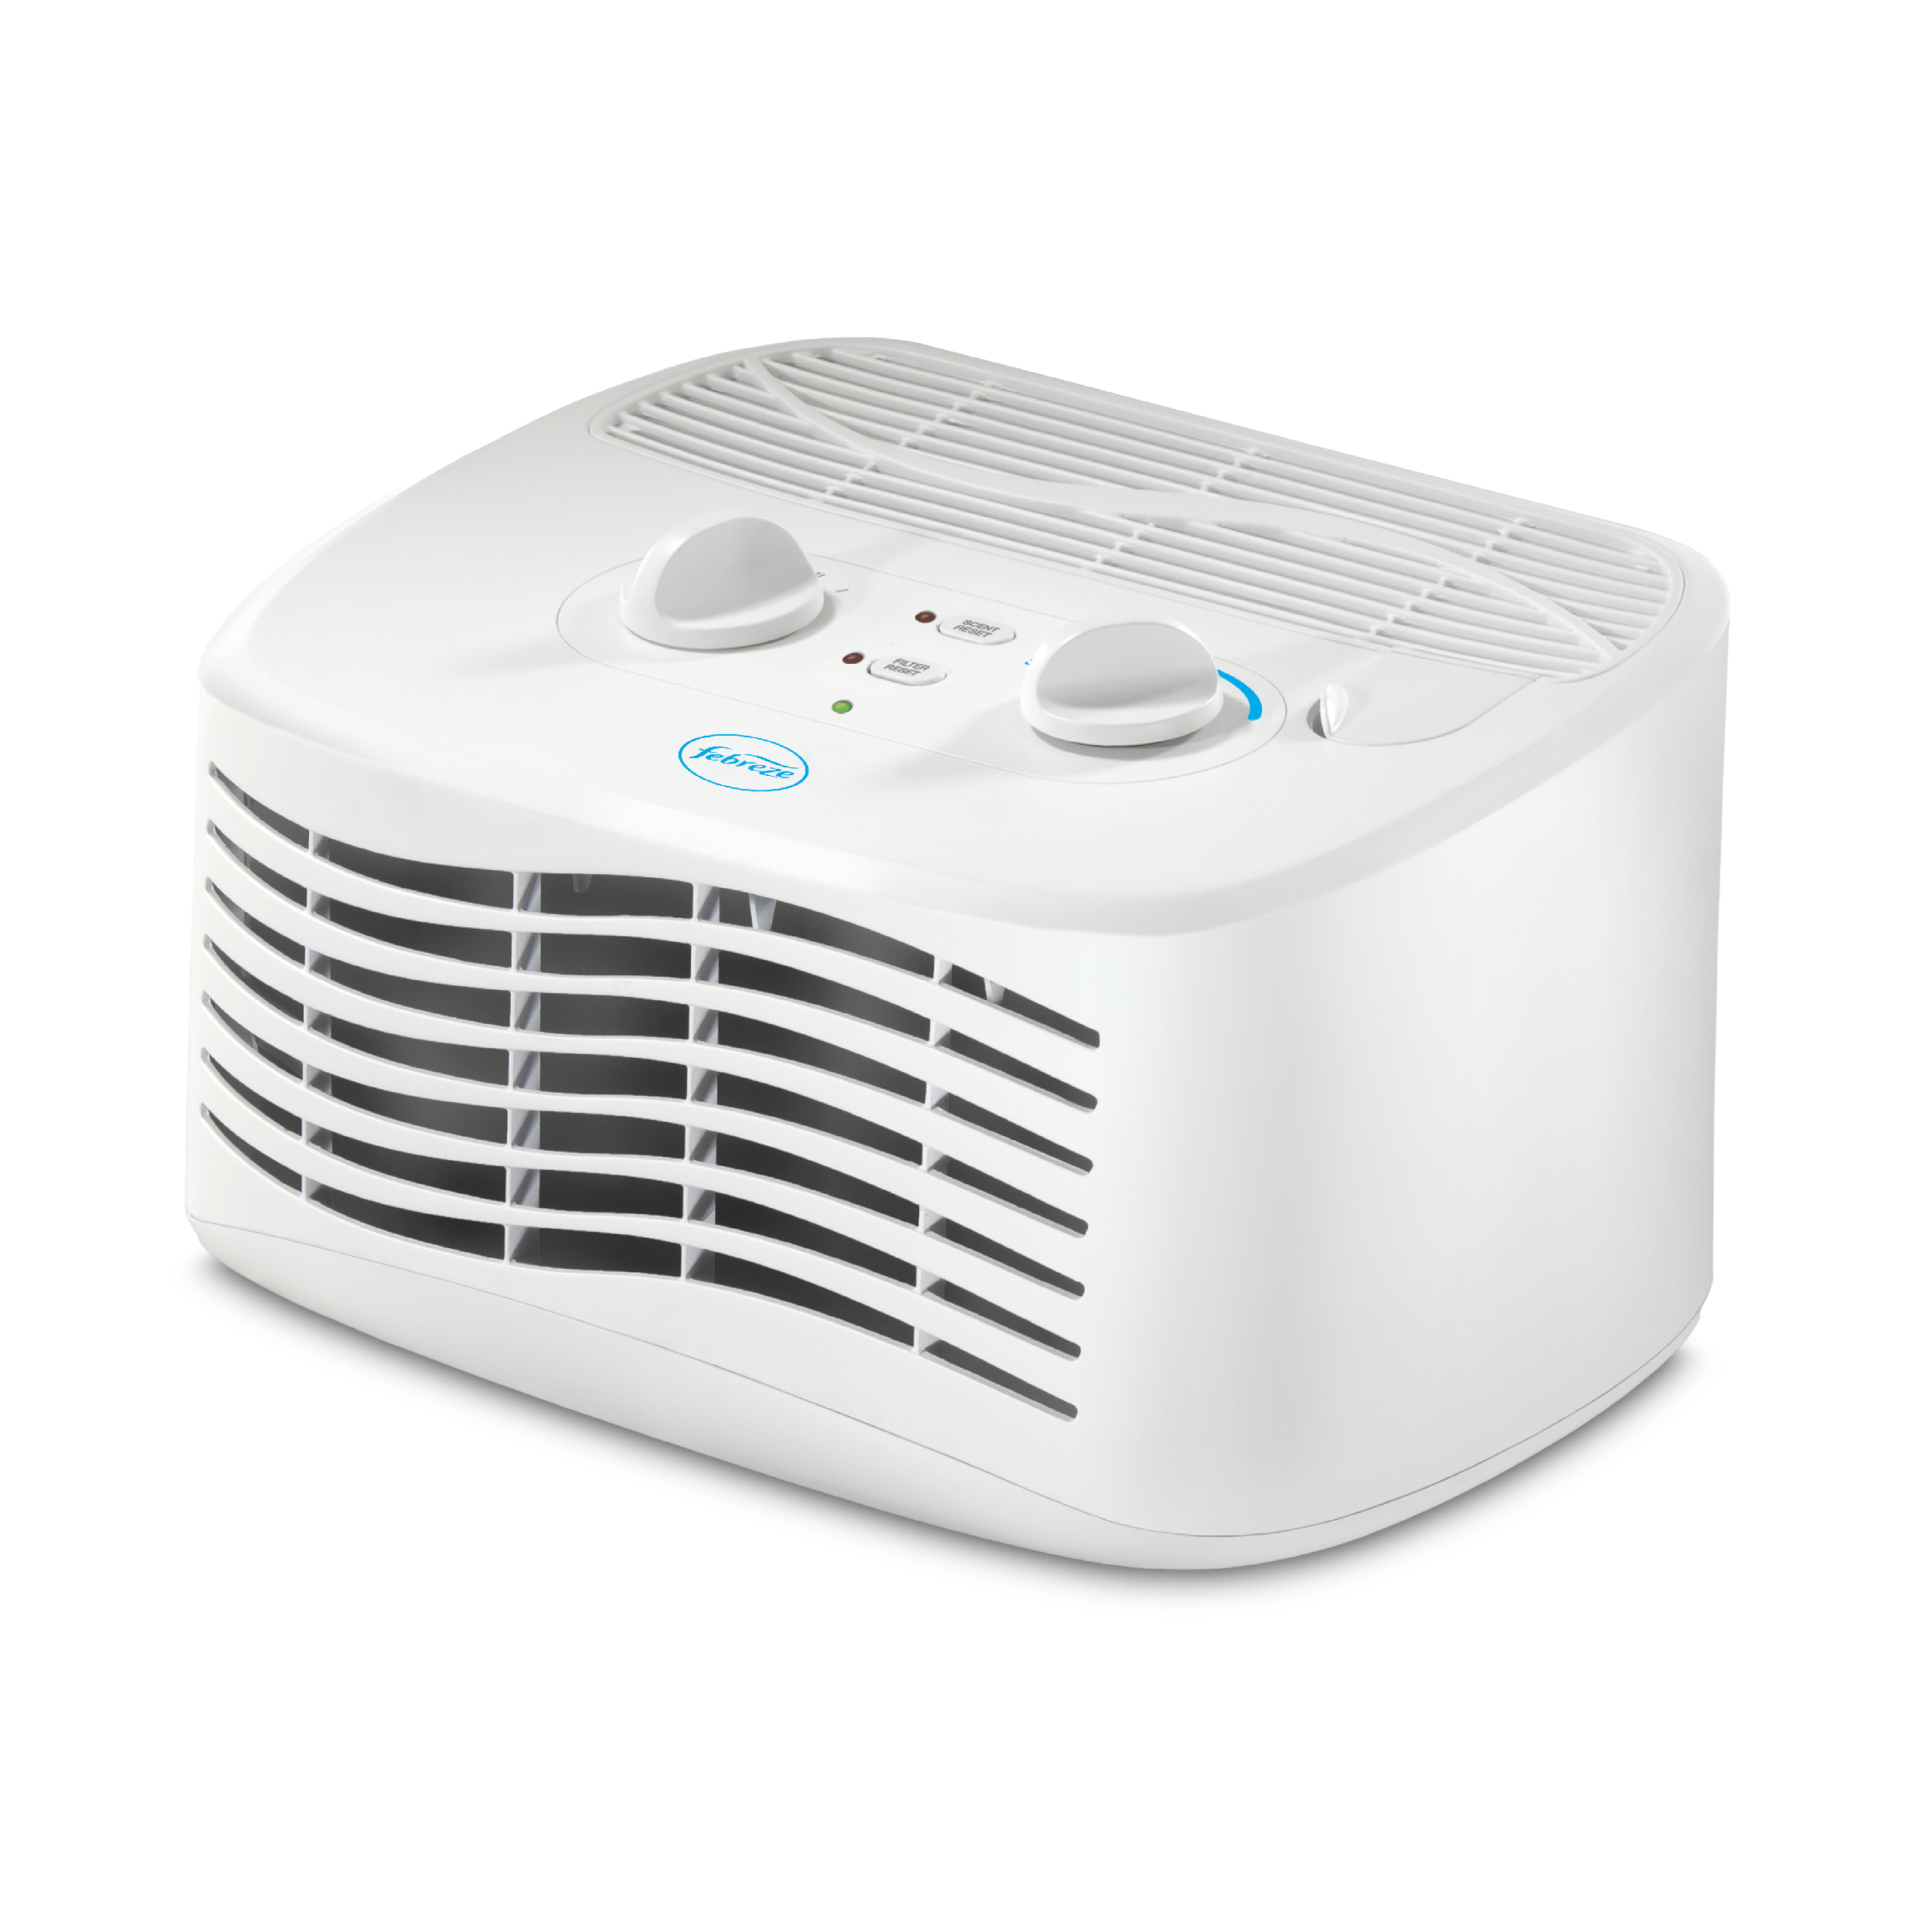 Febreze Tabletop HEPA-Type Air Purifier FHT170W, White - image 1 of 12